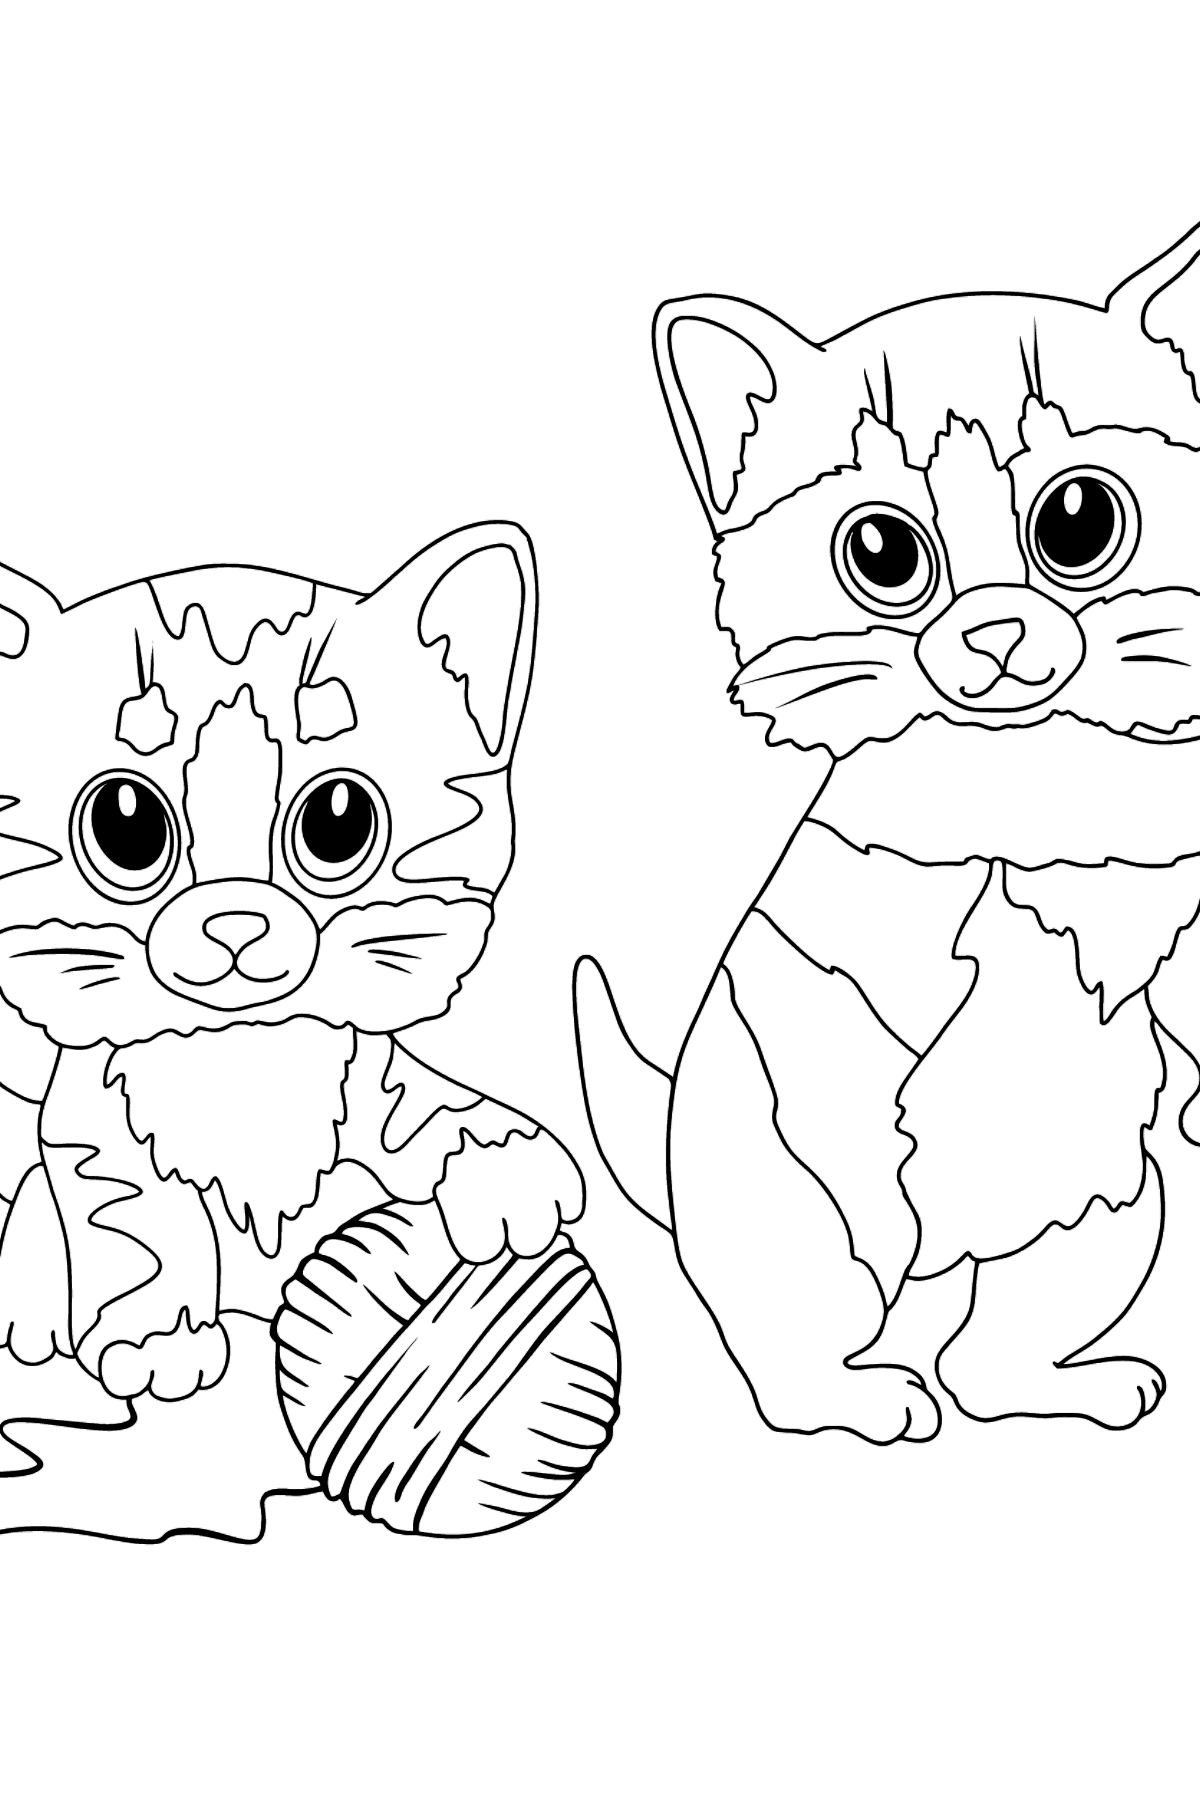 Kittens and Ball of Yarn coloring page - Coloring Pages for Kids